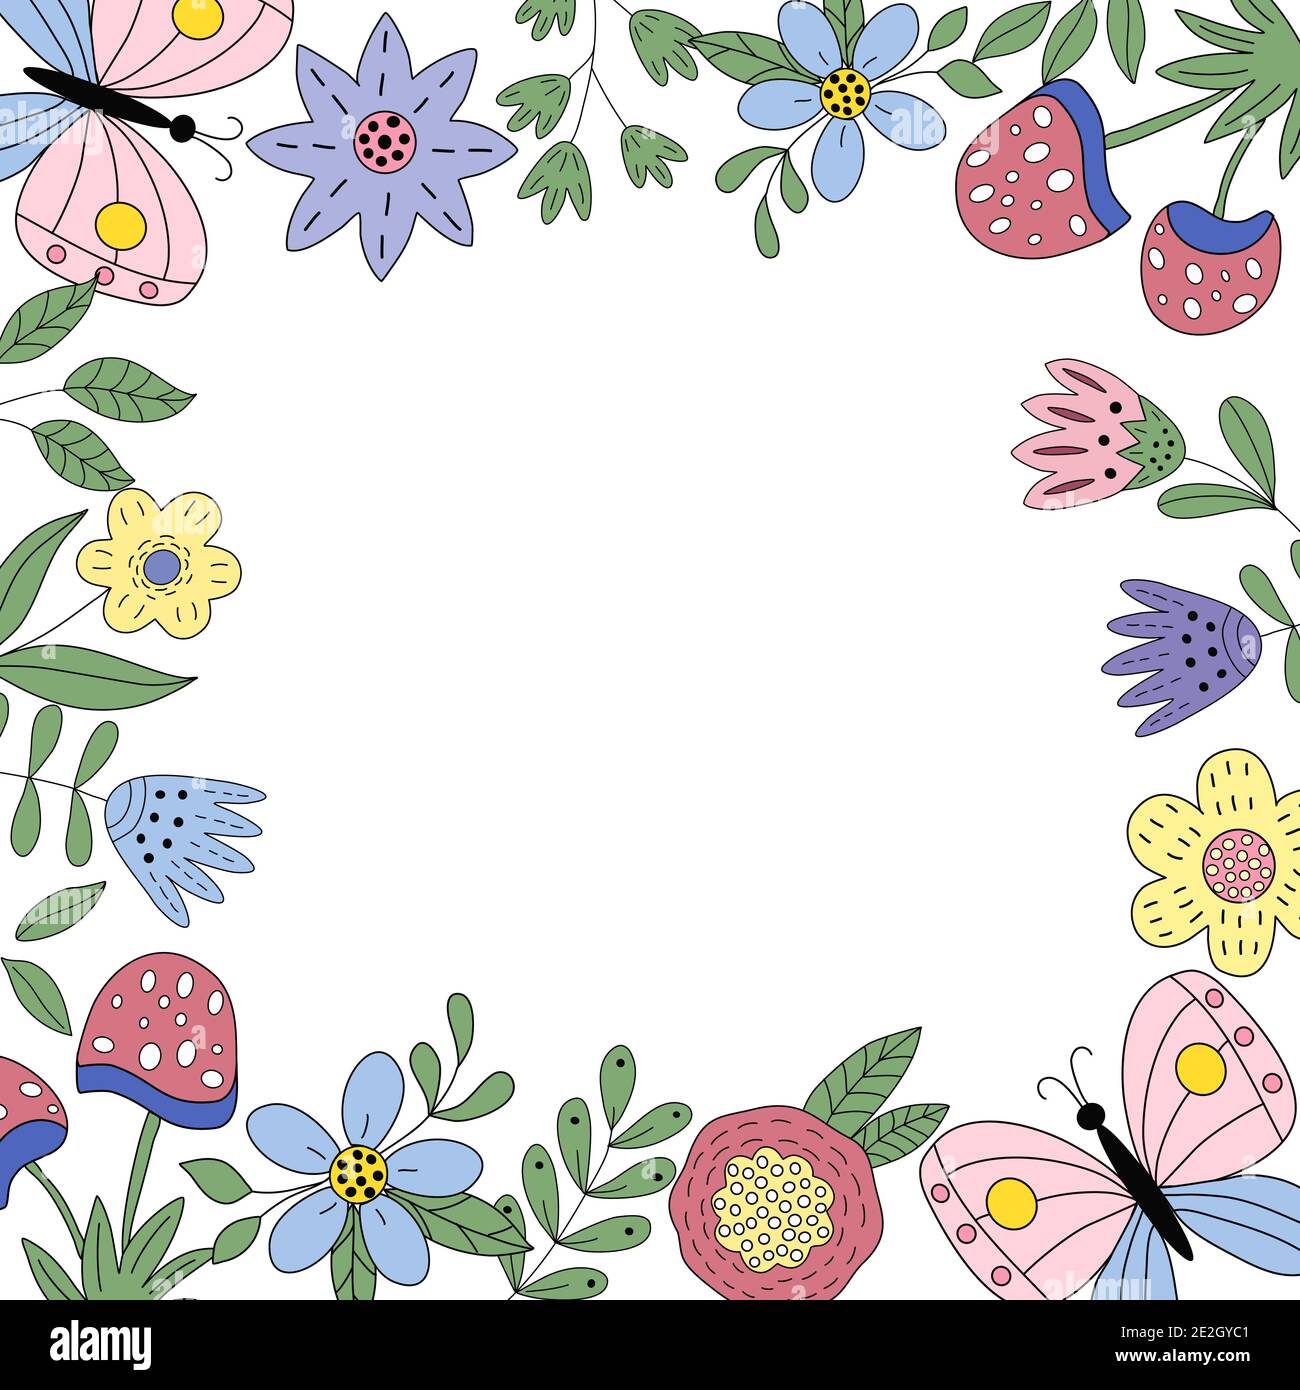 Frame with spring elements - flowers, butterflies Stock Vector